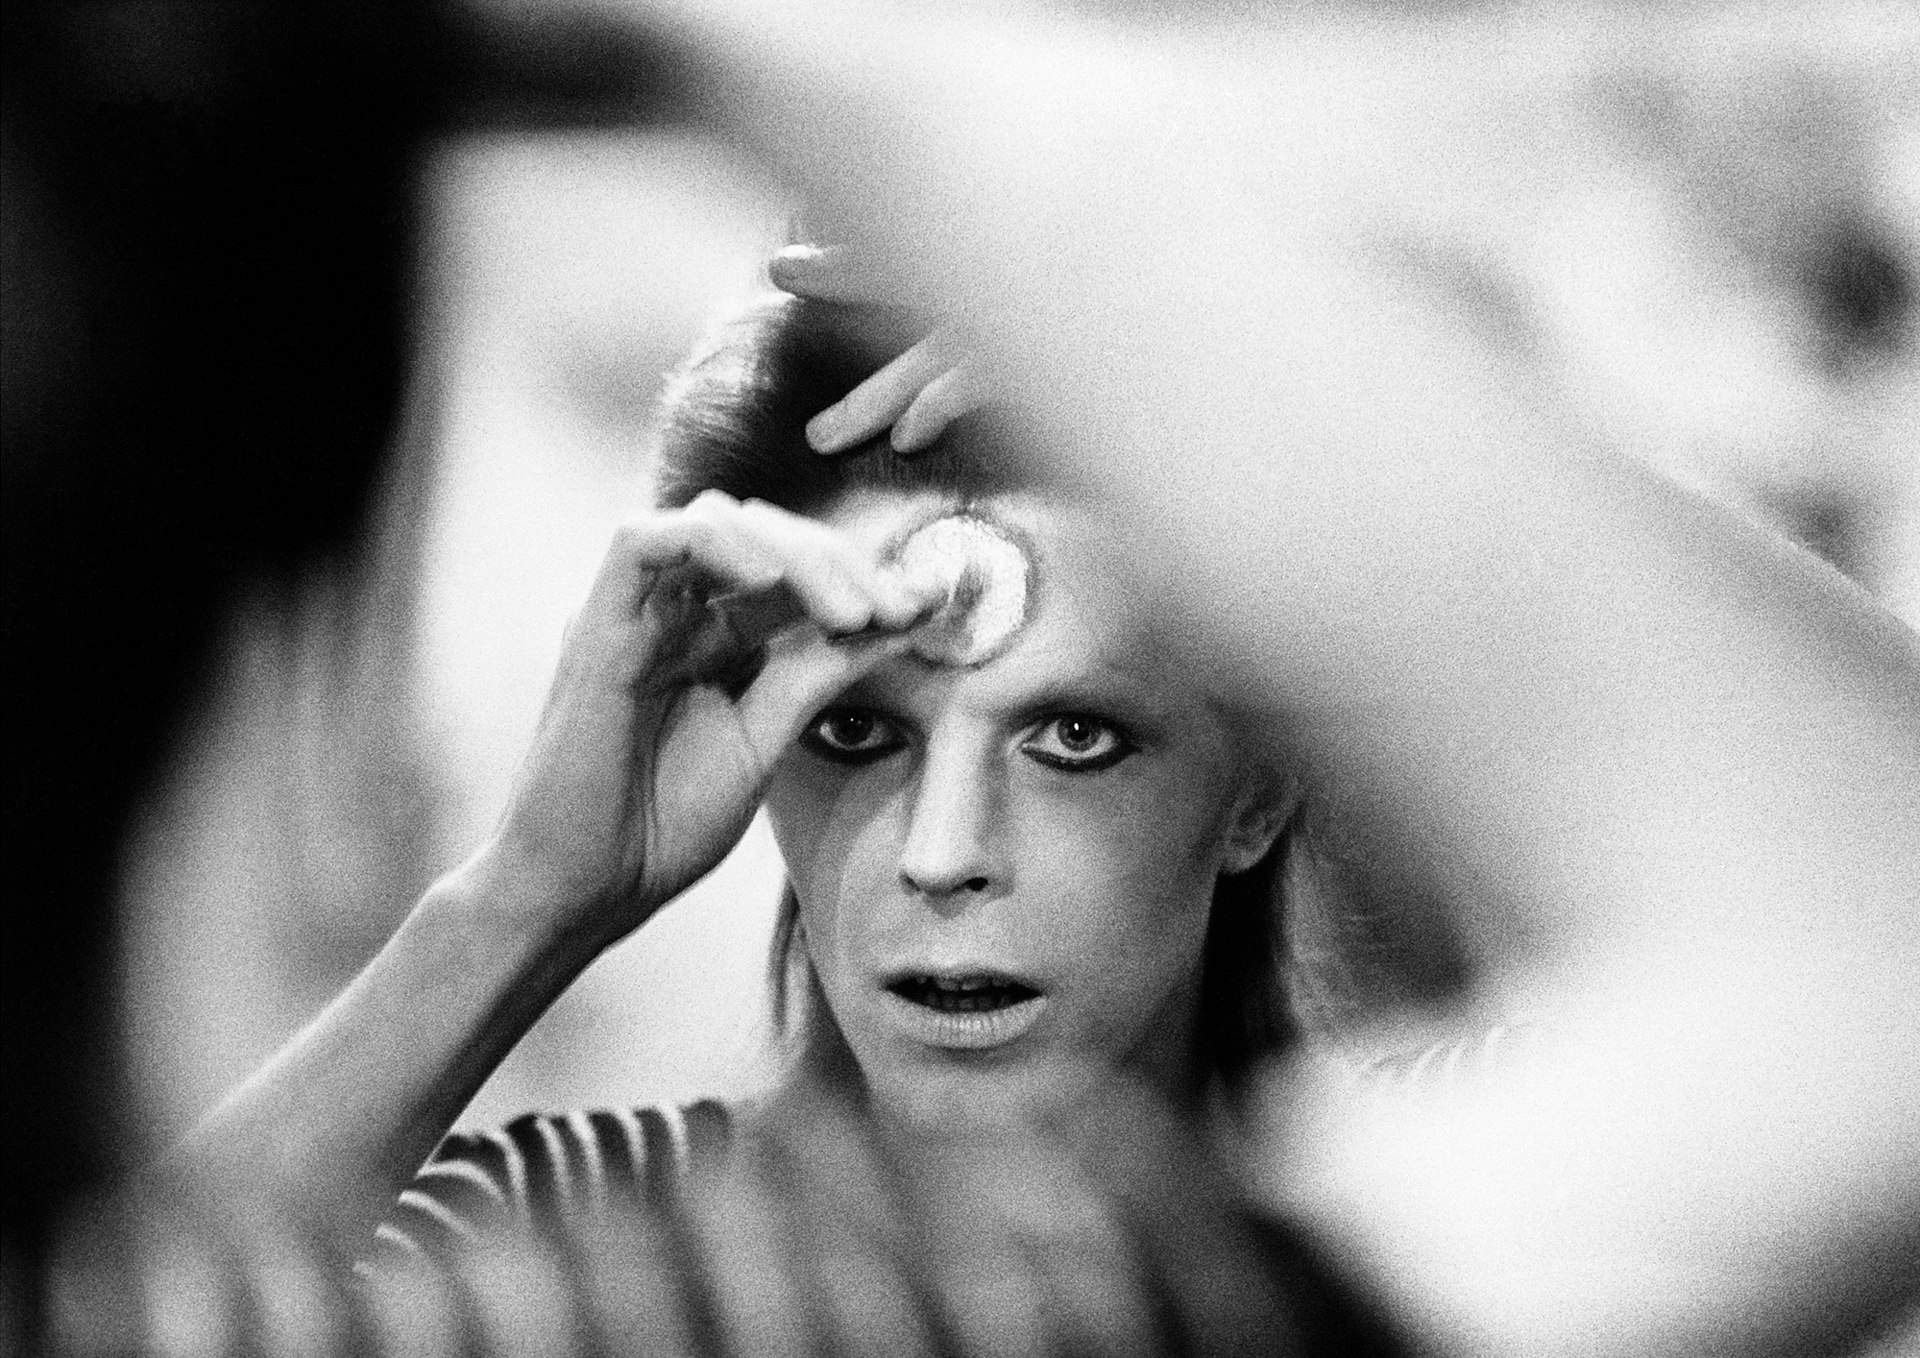 Rare and intimate images of David Bowie, from the archive of photographer Mick Rock